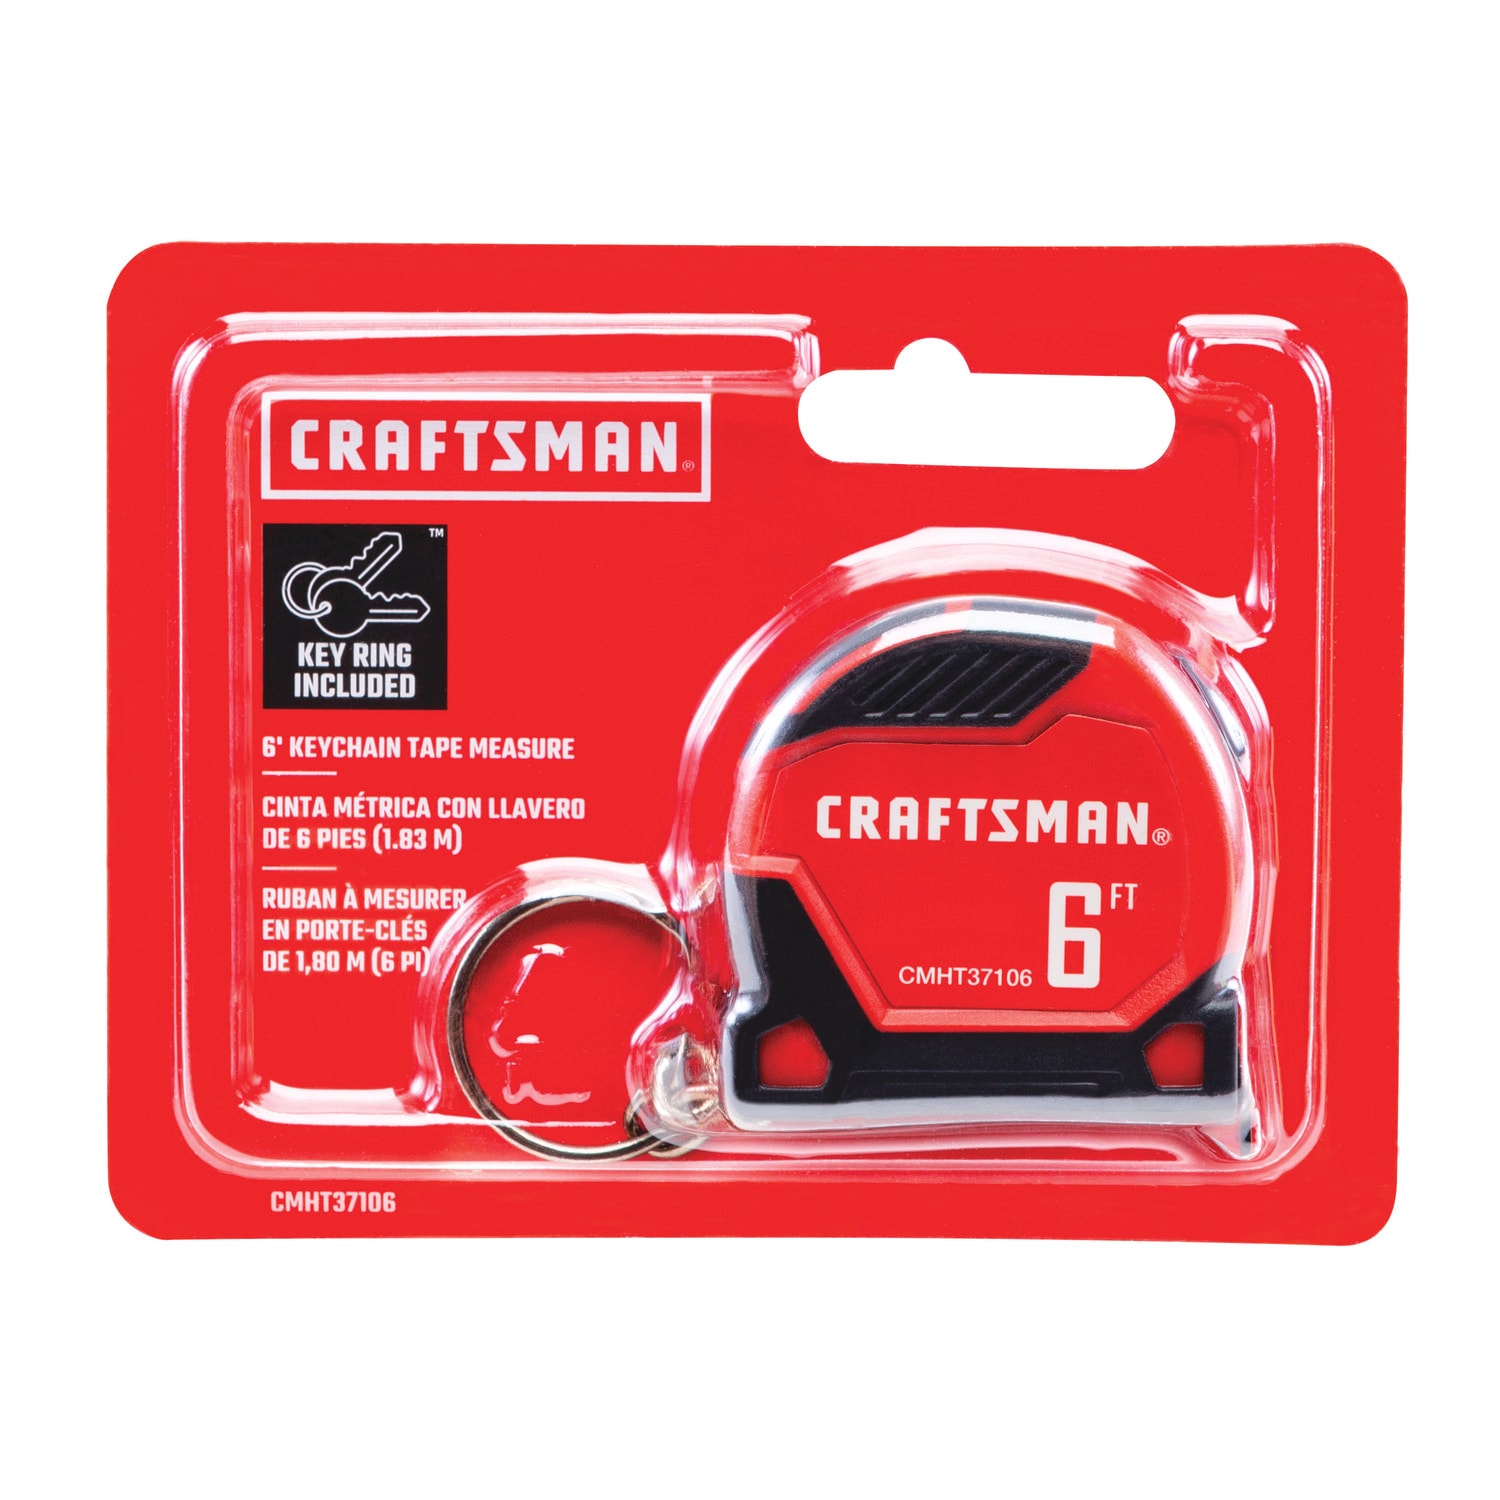 New Craftsman Pocket Tape Measure has Everything Except for…